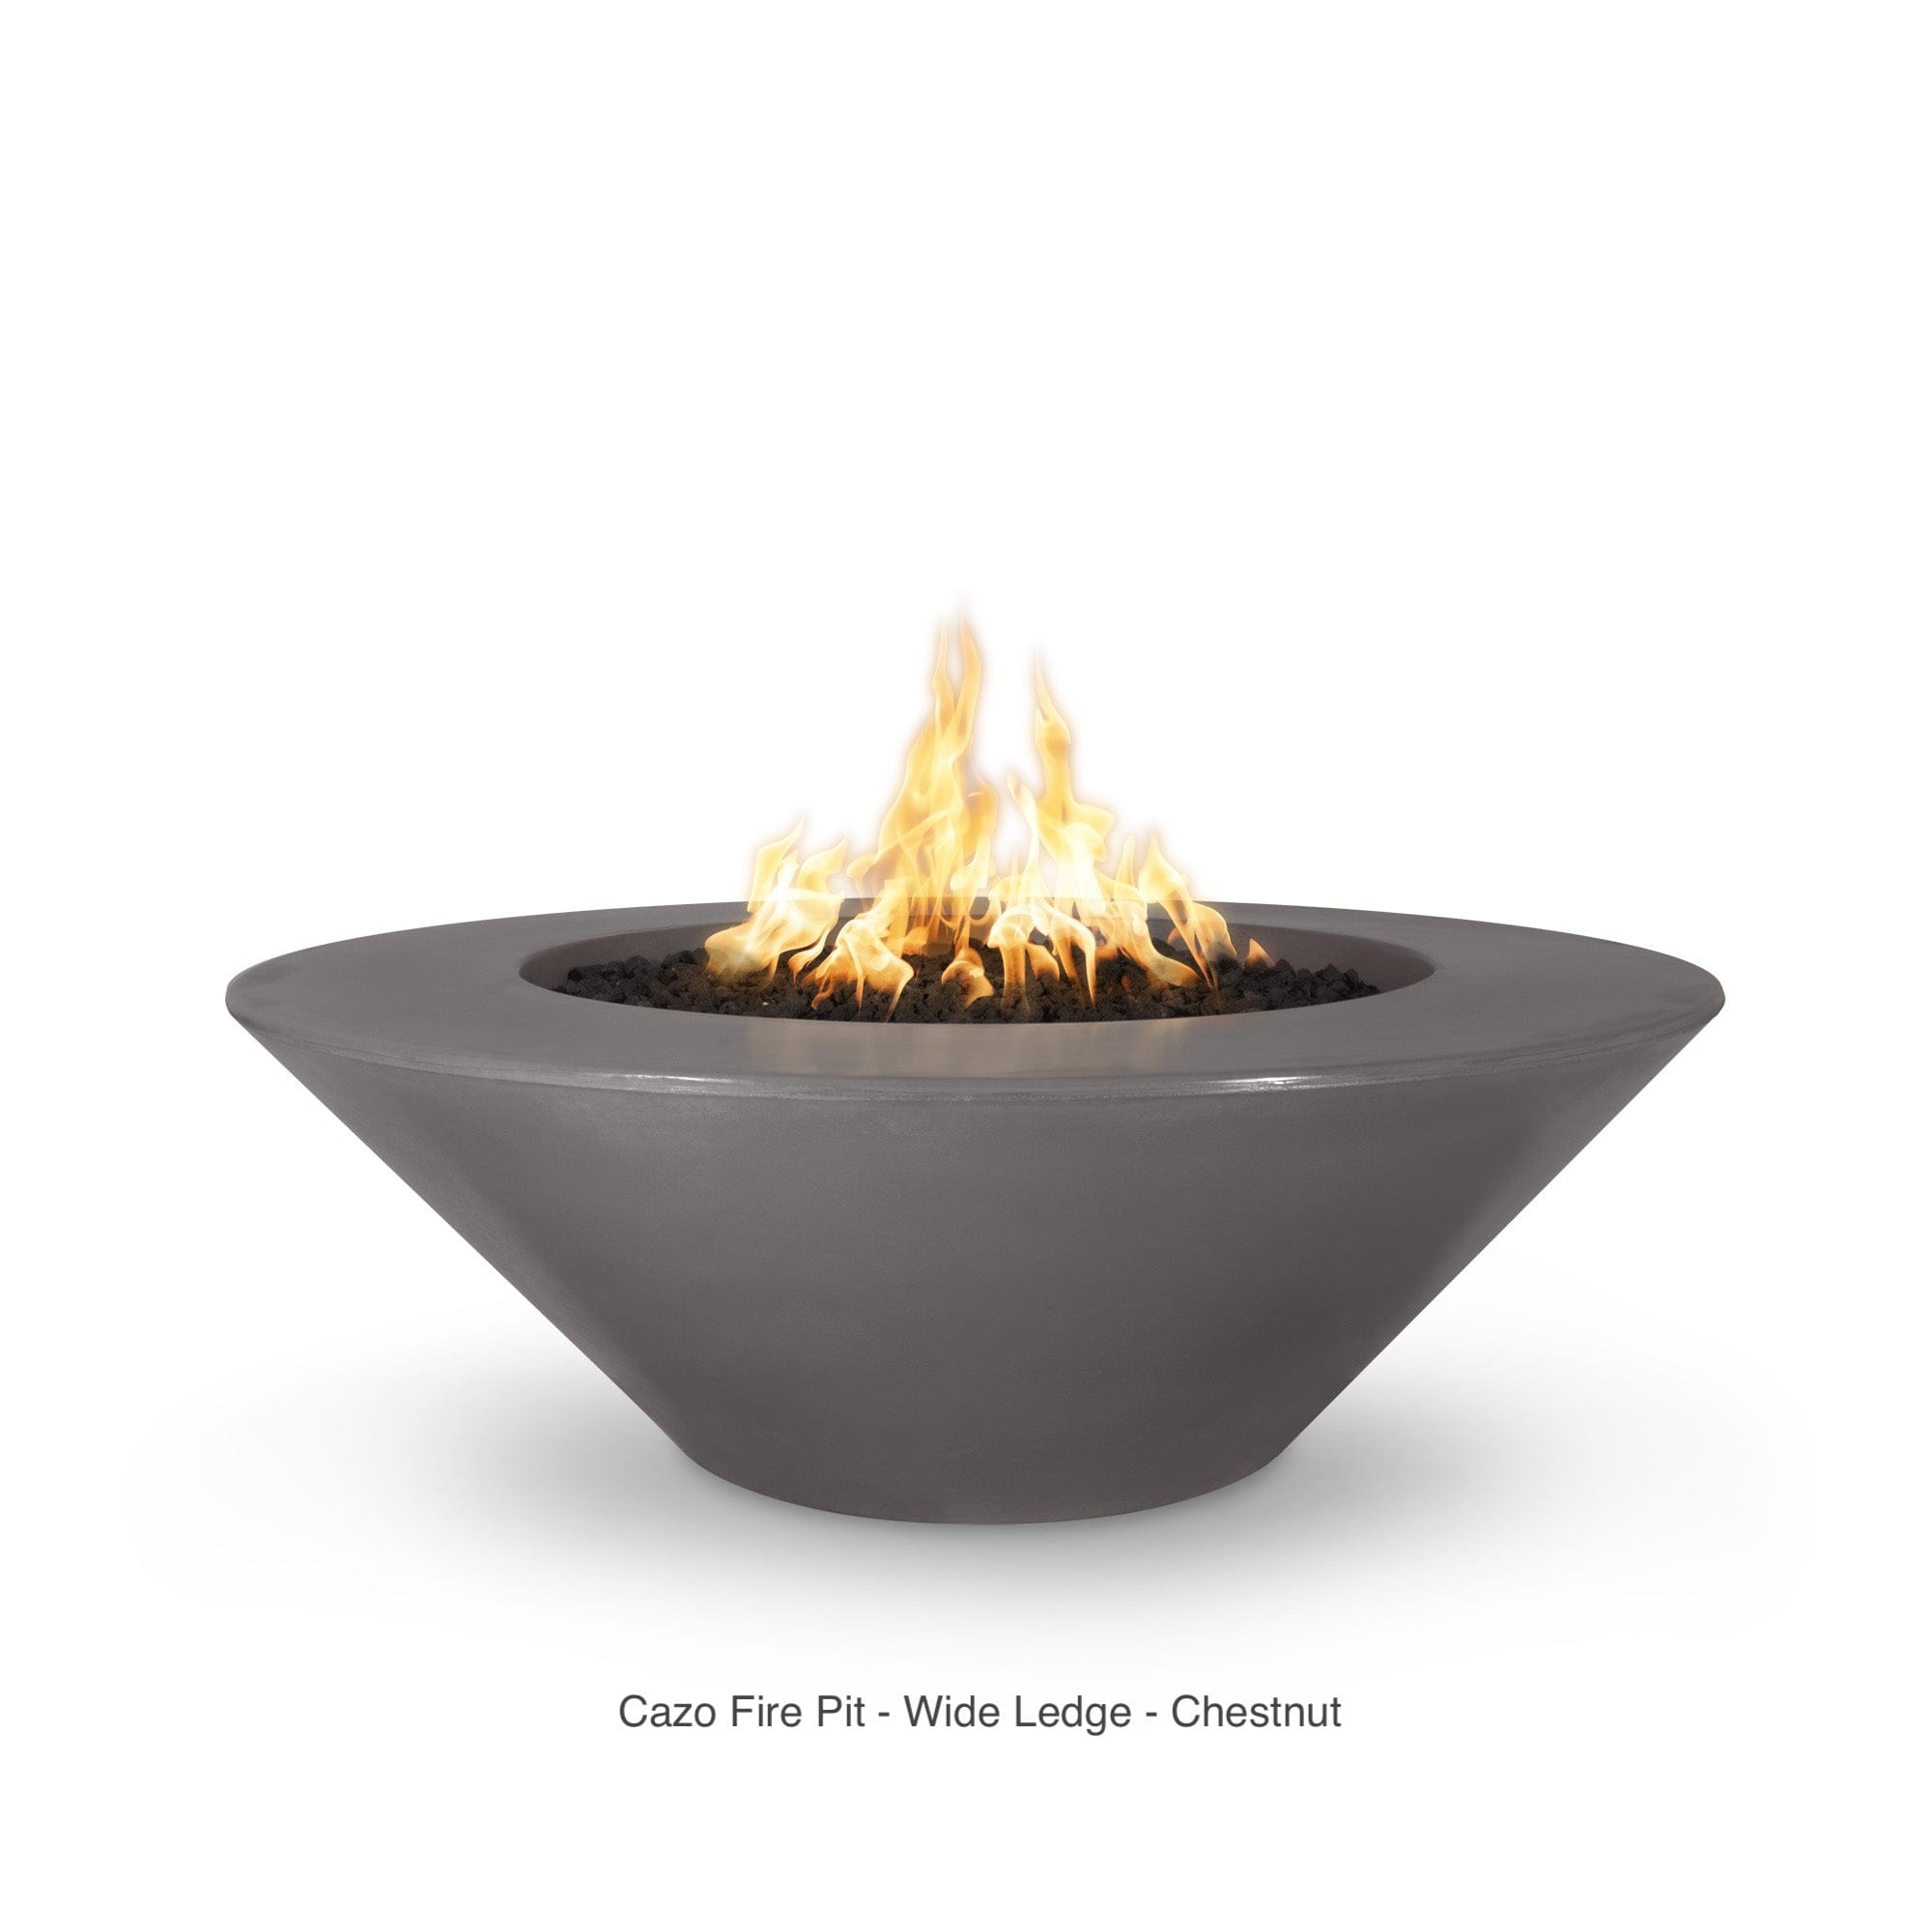 The Outdoor Plus Fire Features The Outdoor Plus 48", 60" Round Cazo Wide Ledge GFRC Concrete & Metal Powder Coat Fire Pit / OPT-CZ48, OPT-CZ60, OPT-CZPC48, OPT-CZPC60